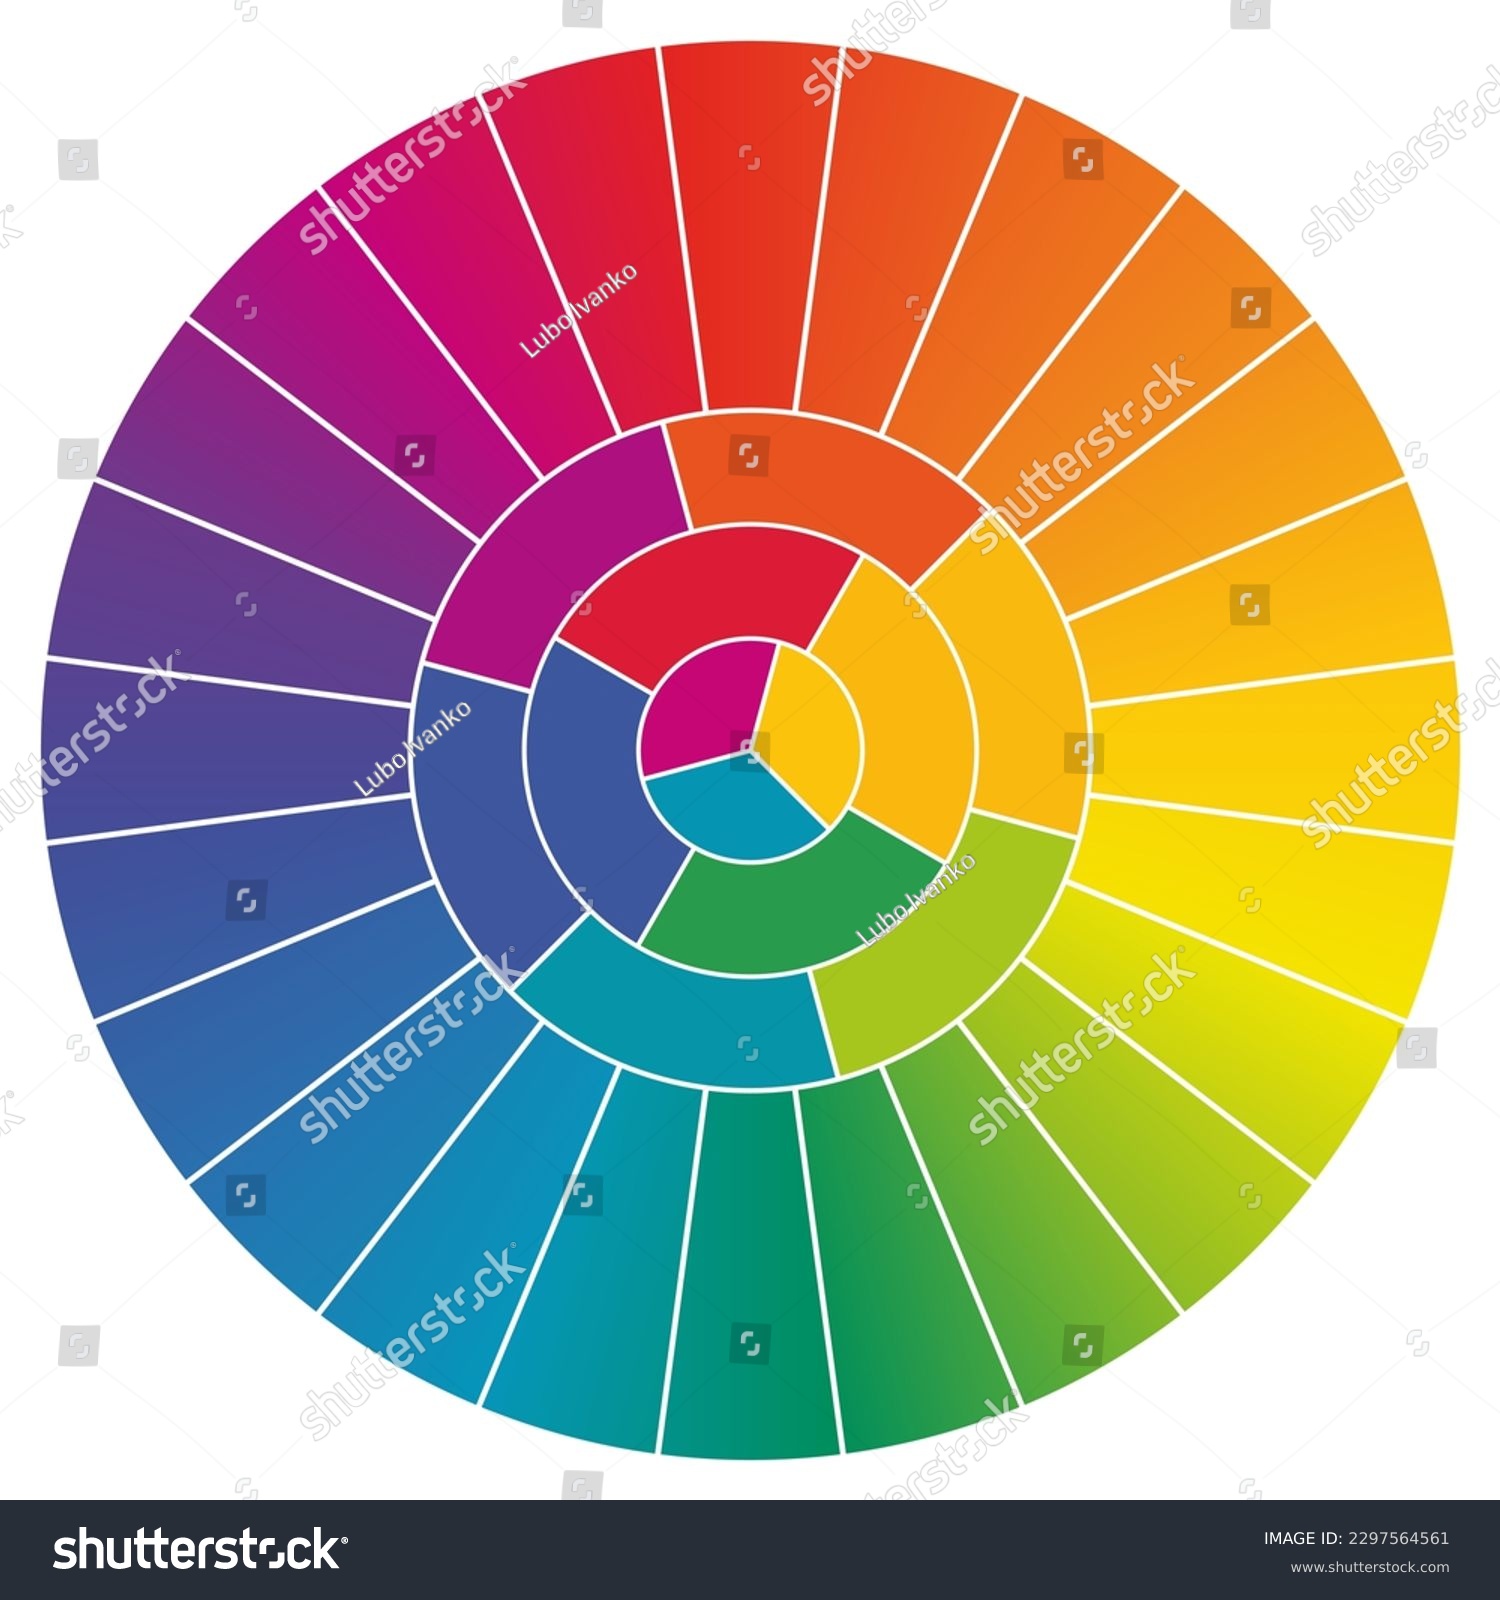 Munsell perceptive color wheel at same chroma - circle divided into different hue, version with 24, 6, 4 and 3 segments #2297564561